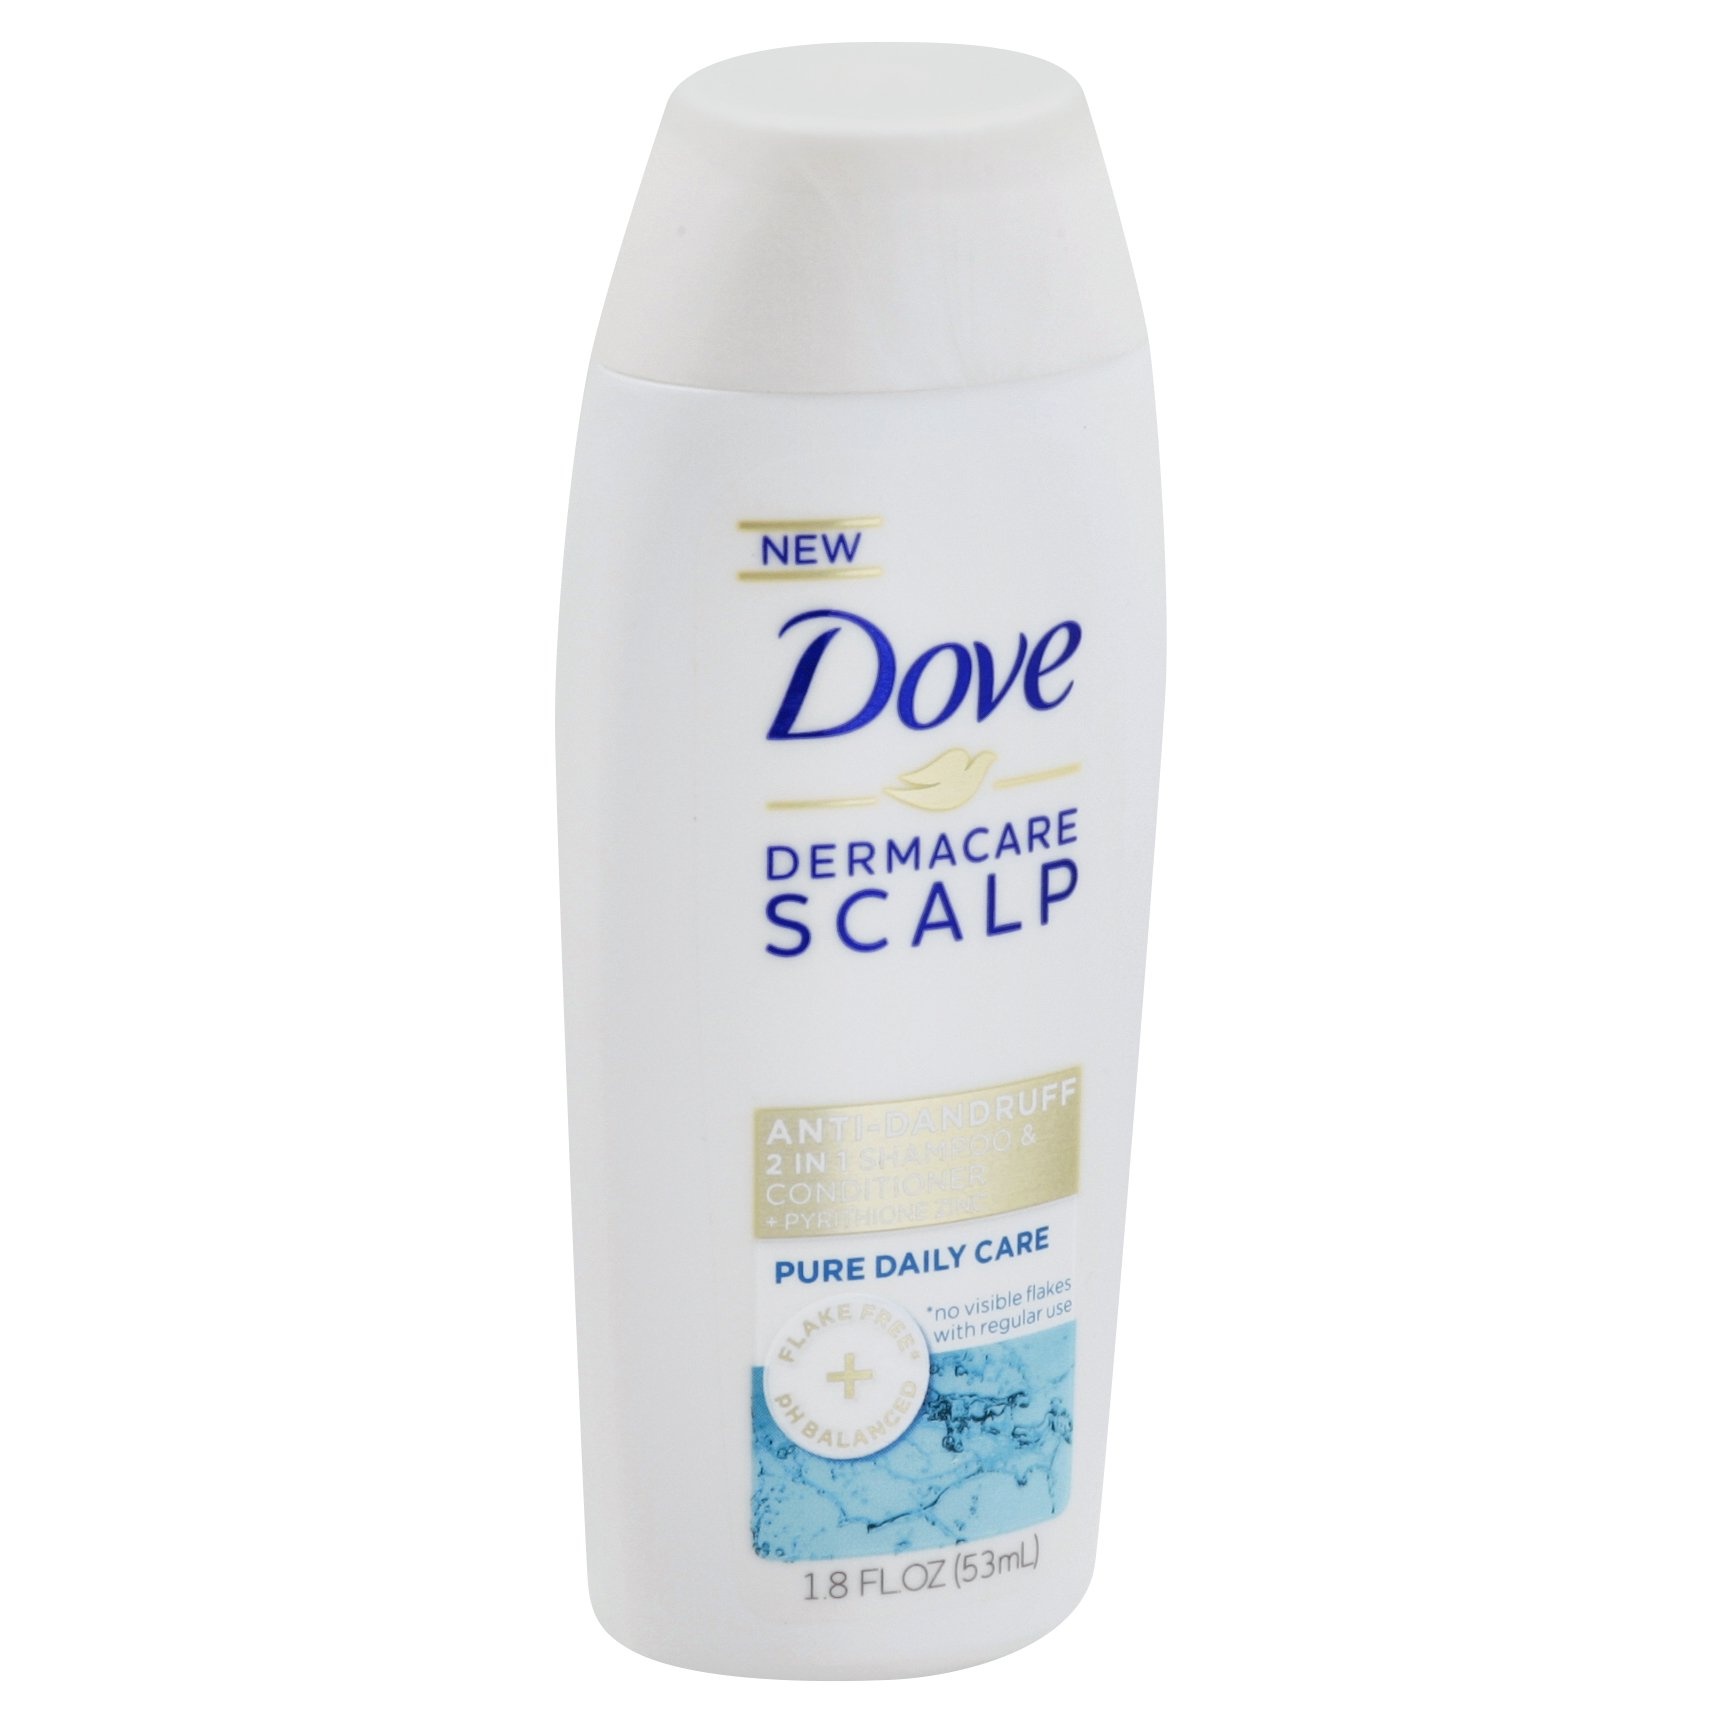 slide 1 of 5, Dove DermaCare Scalp Pure Daily Care 2 in 1 Shampoo and Conditioner, 1.8 oz